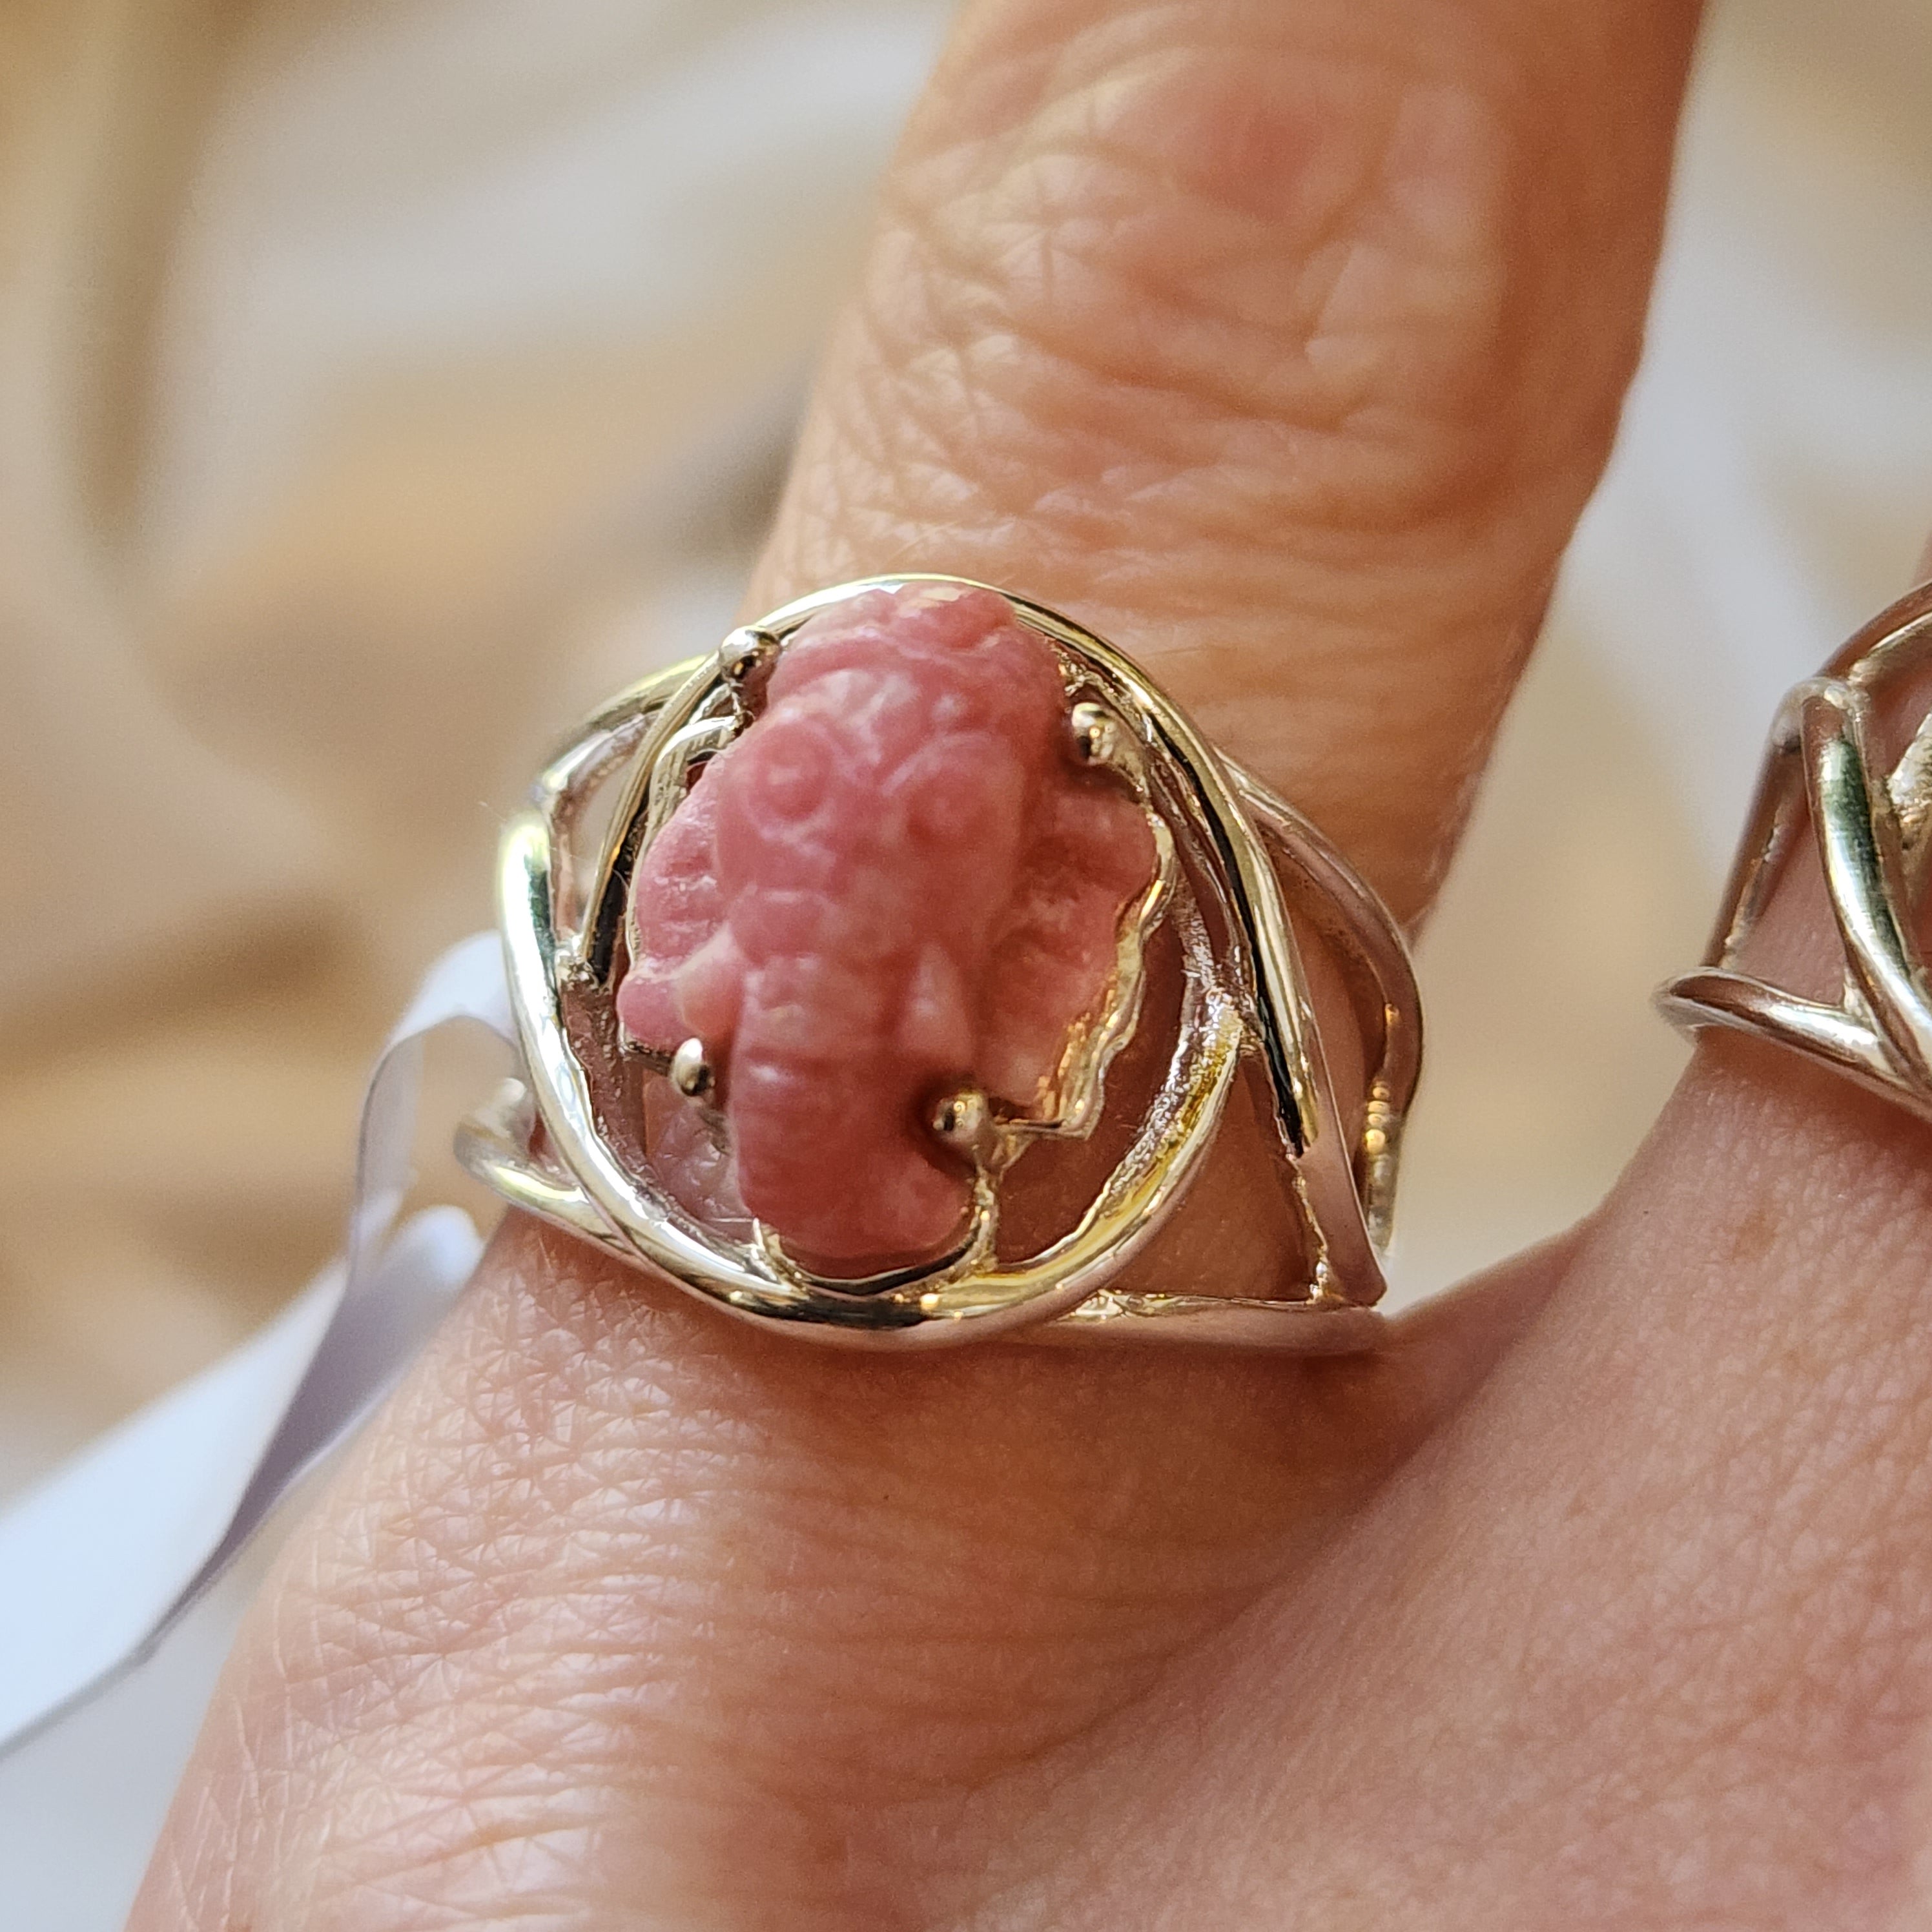 Thulite Ganesha Finger Cuff Adjustable Ring .925 Sterling Silver for Expressing Love, Pleasure & Clearing Blockages